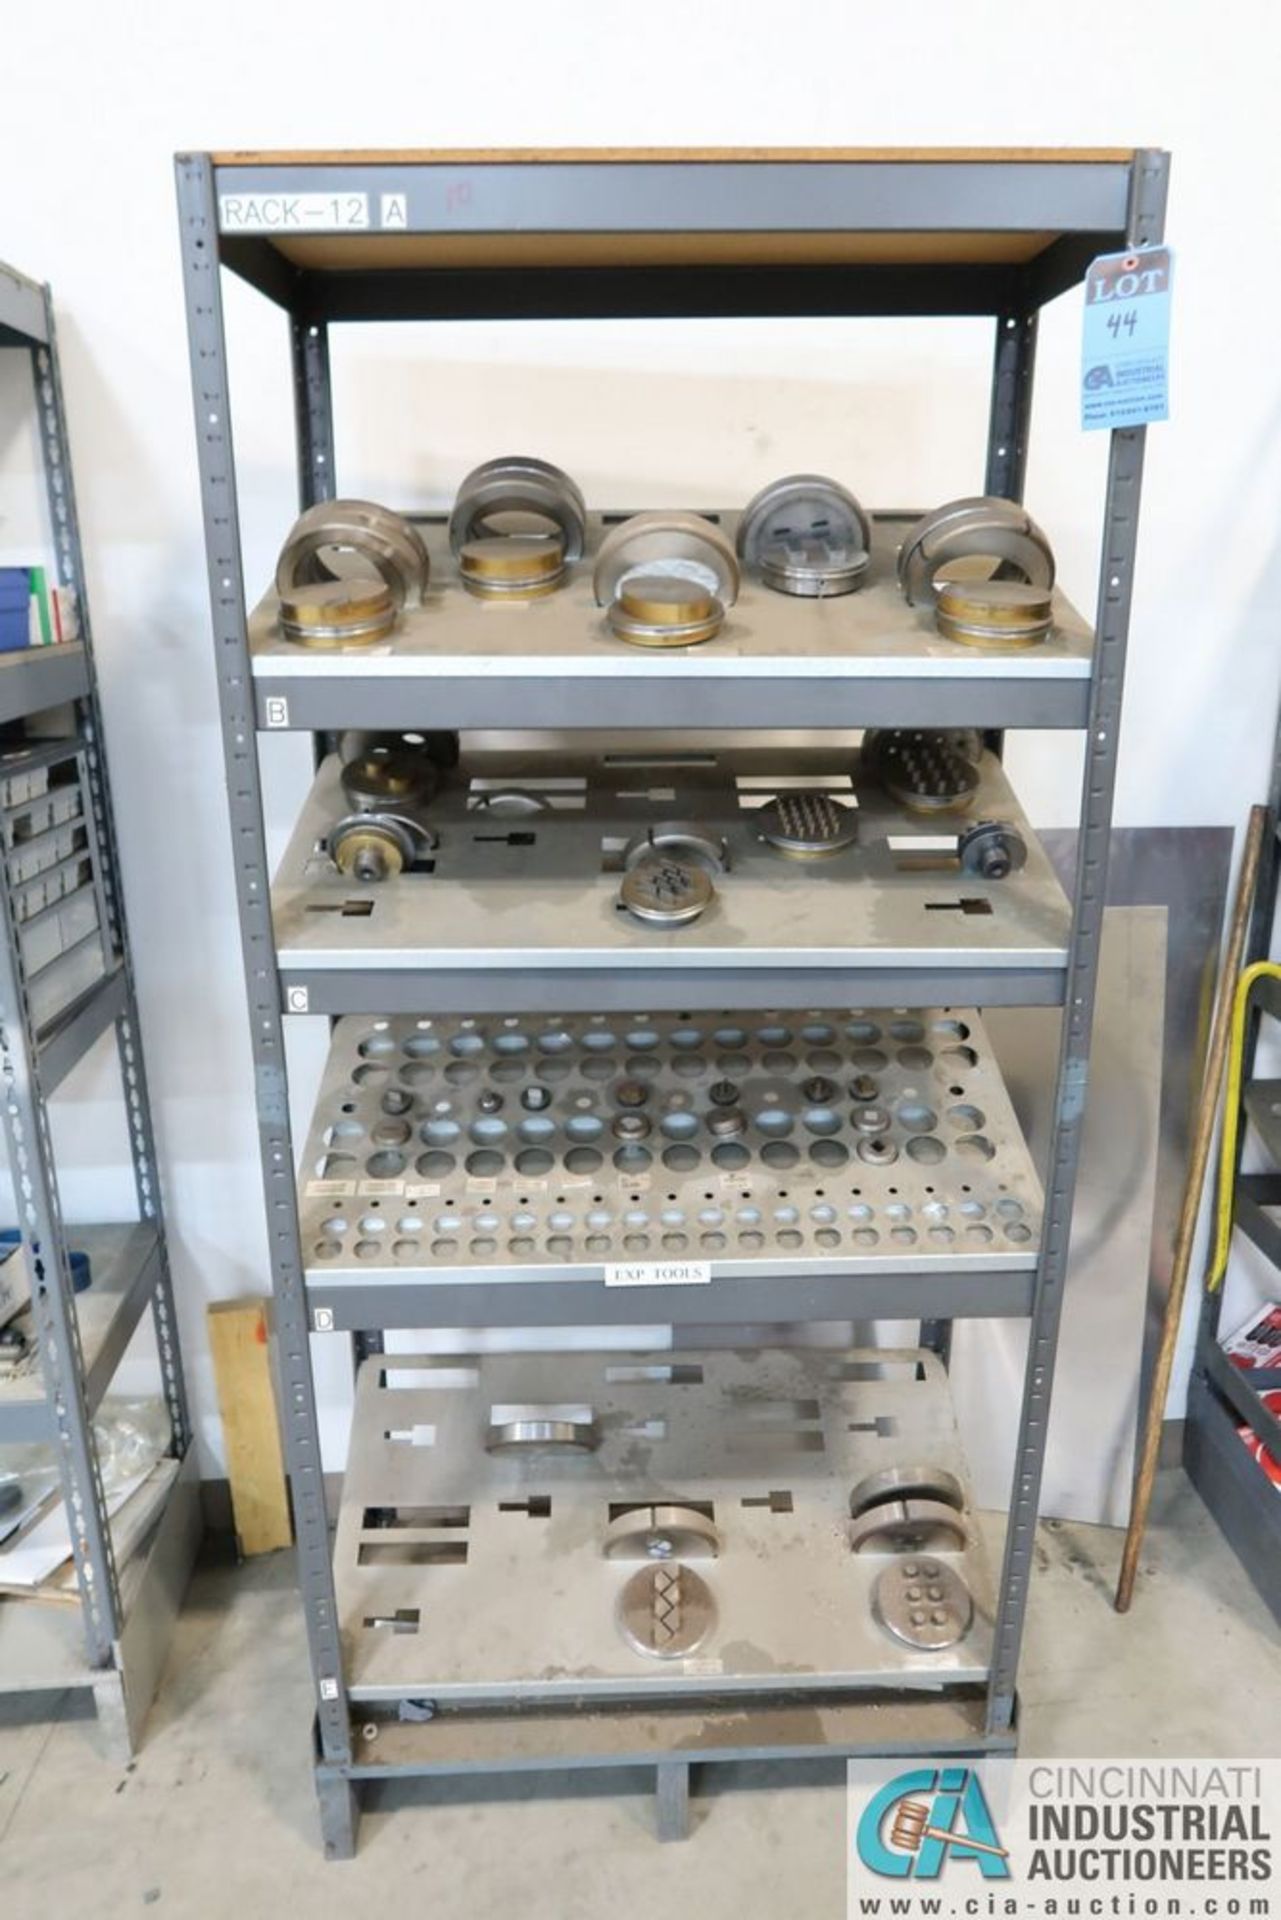 RACK WITH PUNCH TOOLING